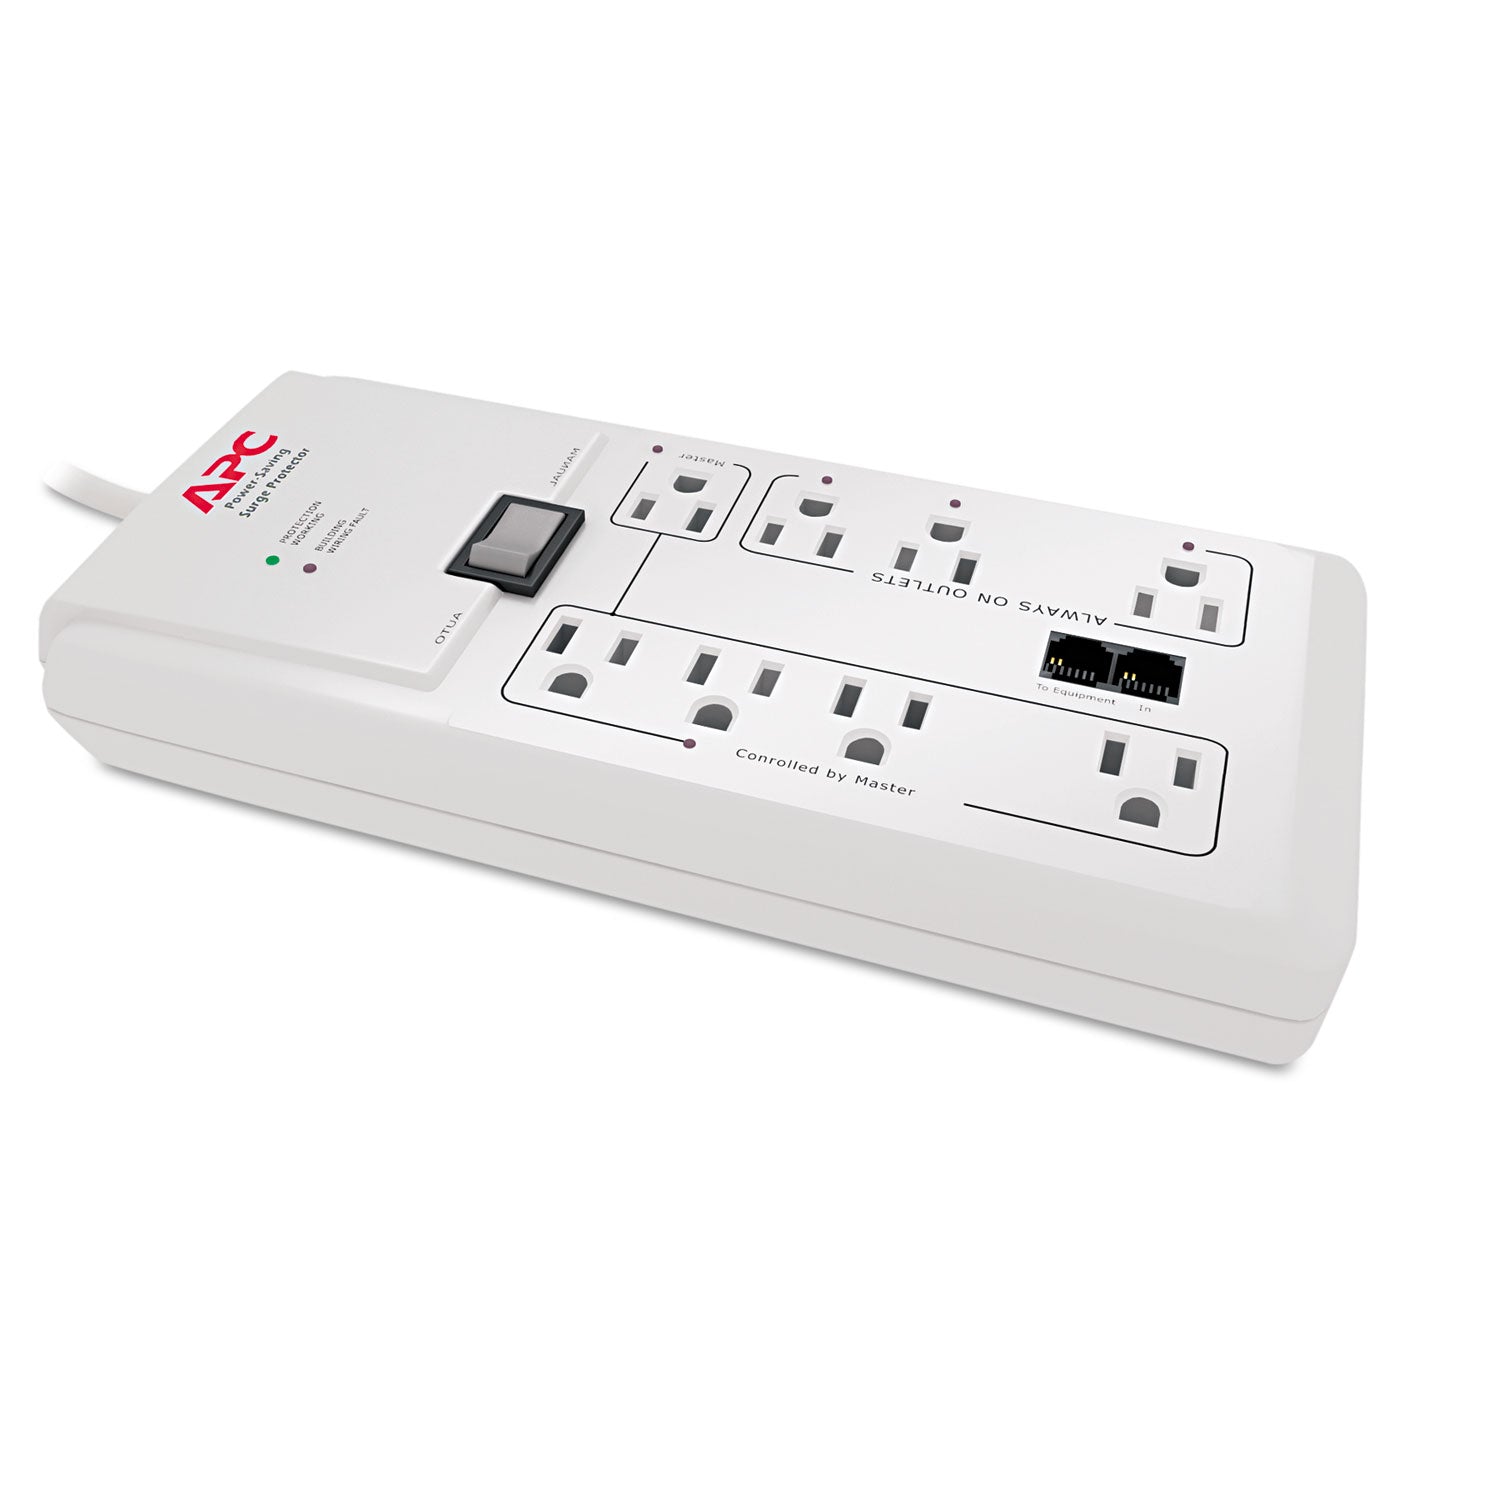 Home/Office SurgeArrest Protector, 8 AC Outlets, 6 ft Cord, 2,030 J, White - 